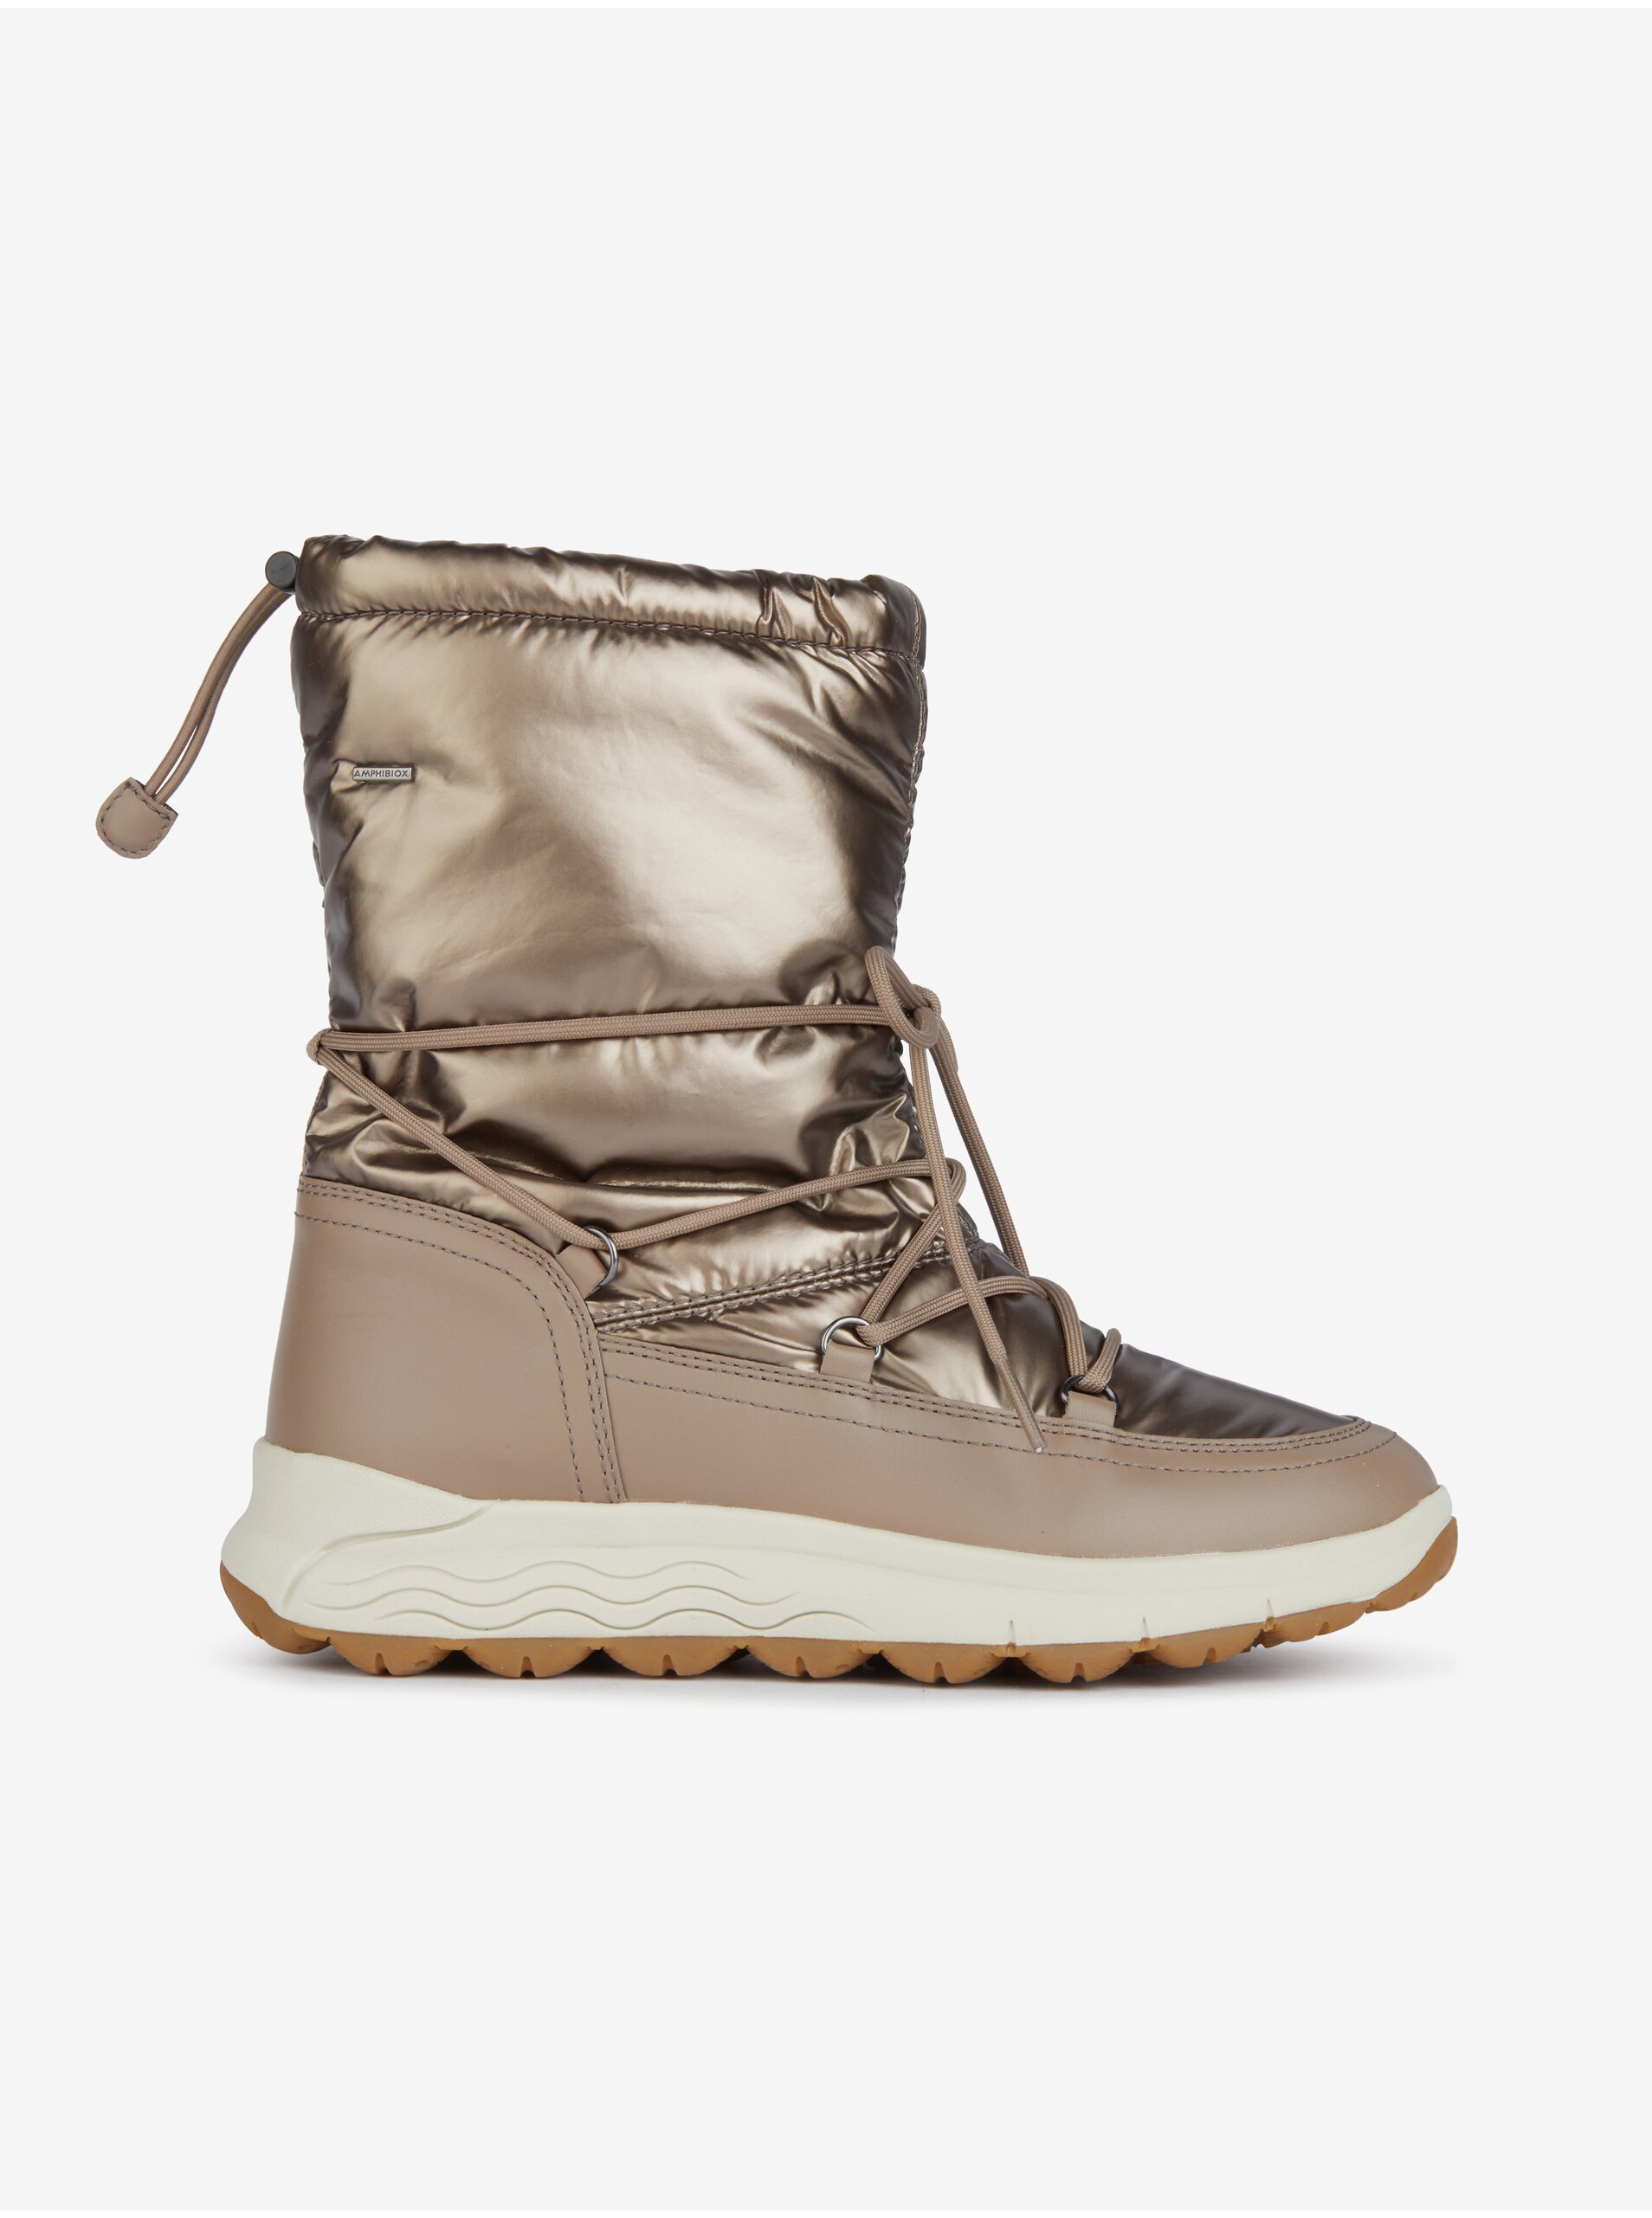 Women's snow boots with leather details in gold Geox Spherica - Women